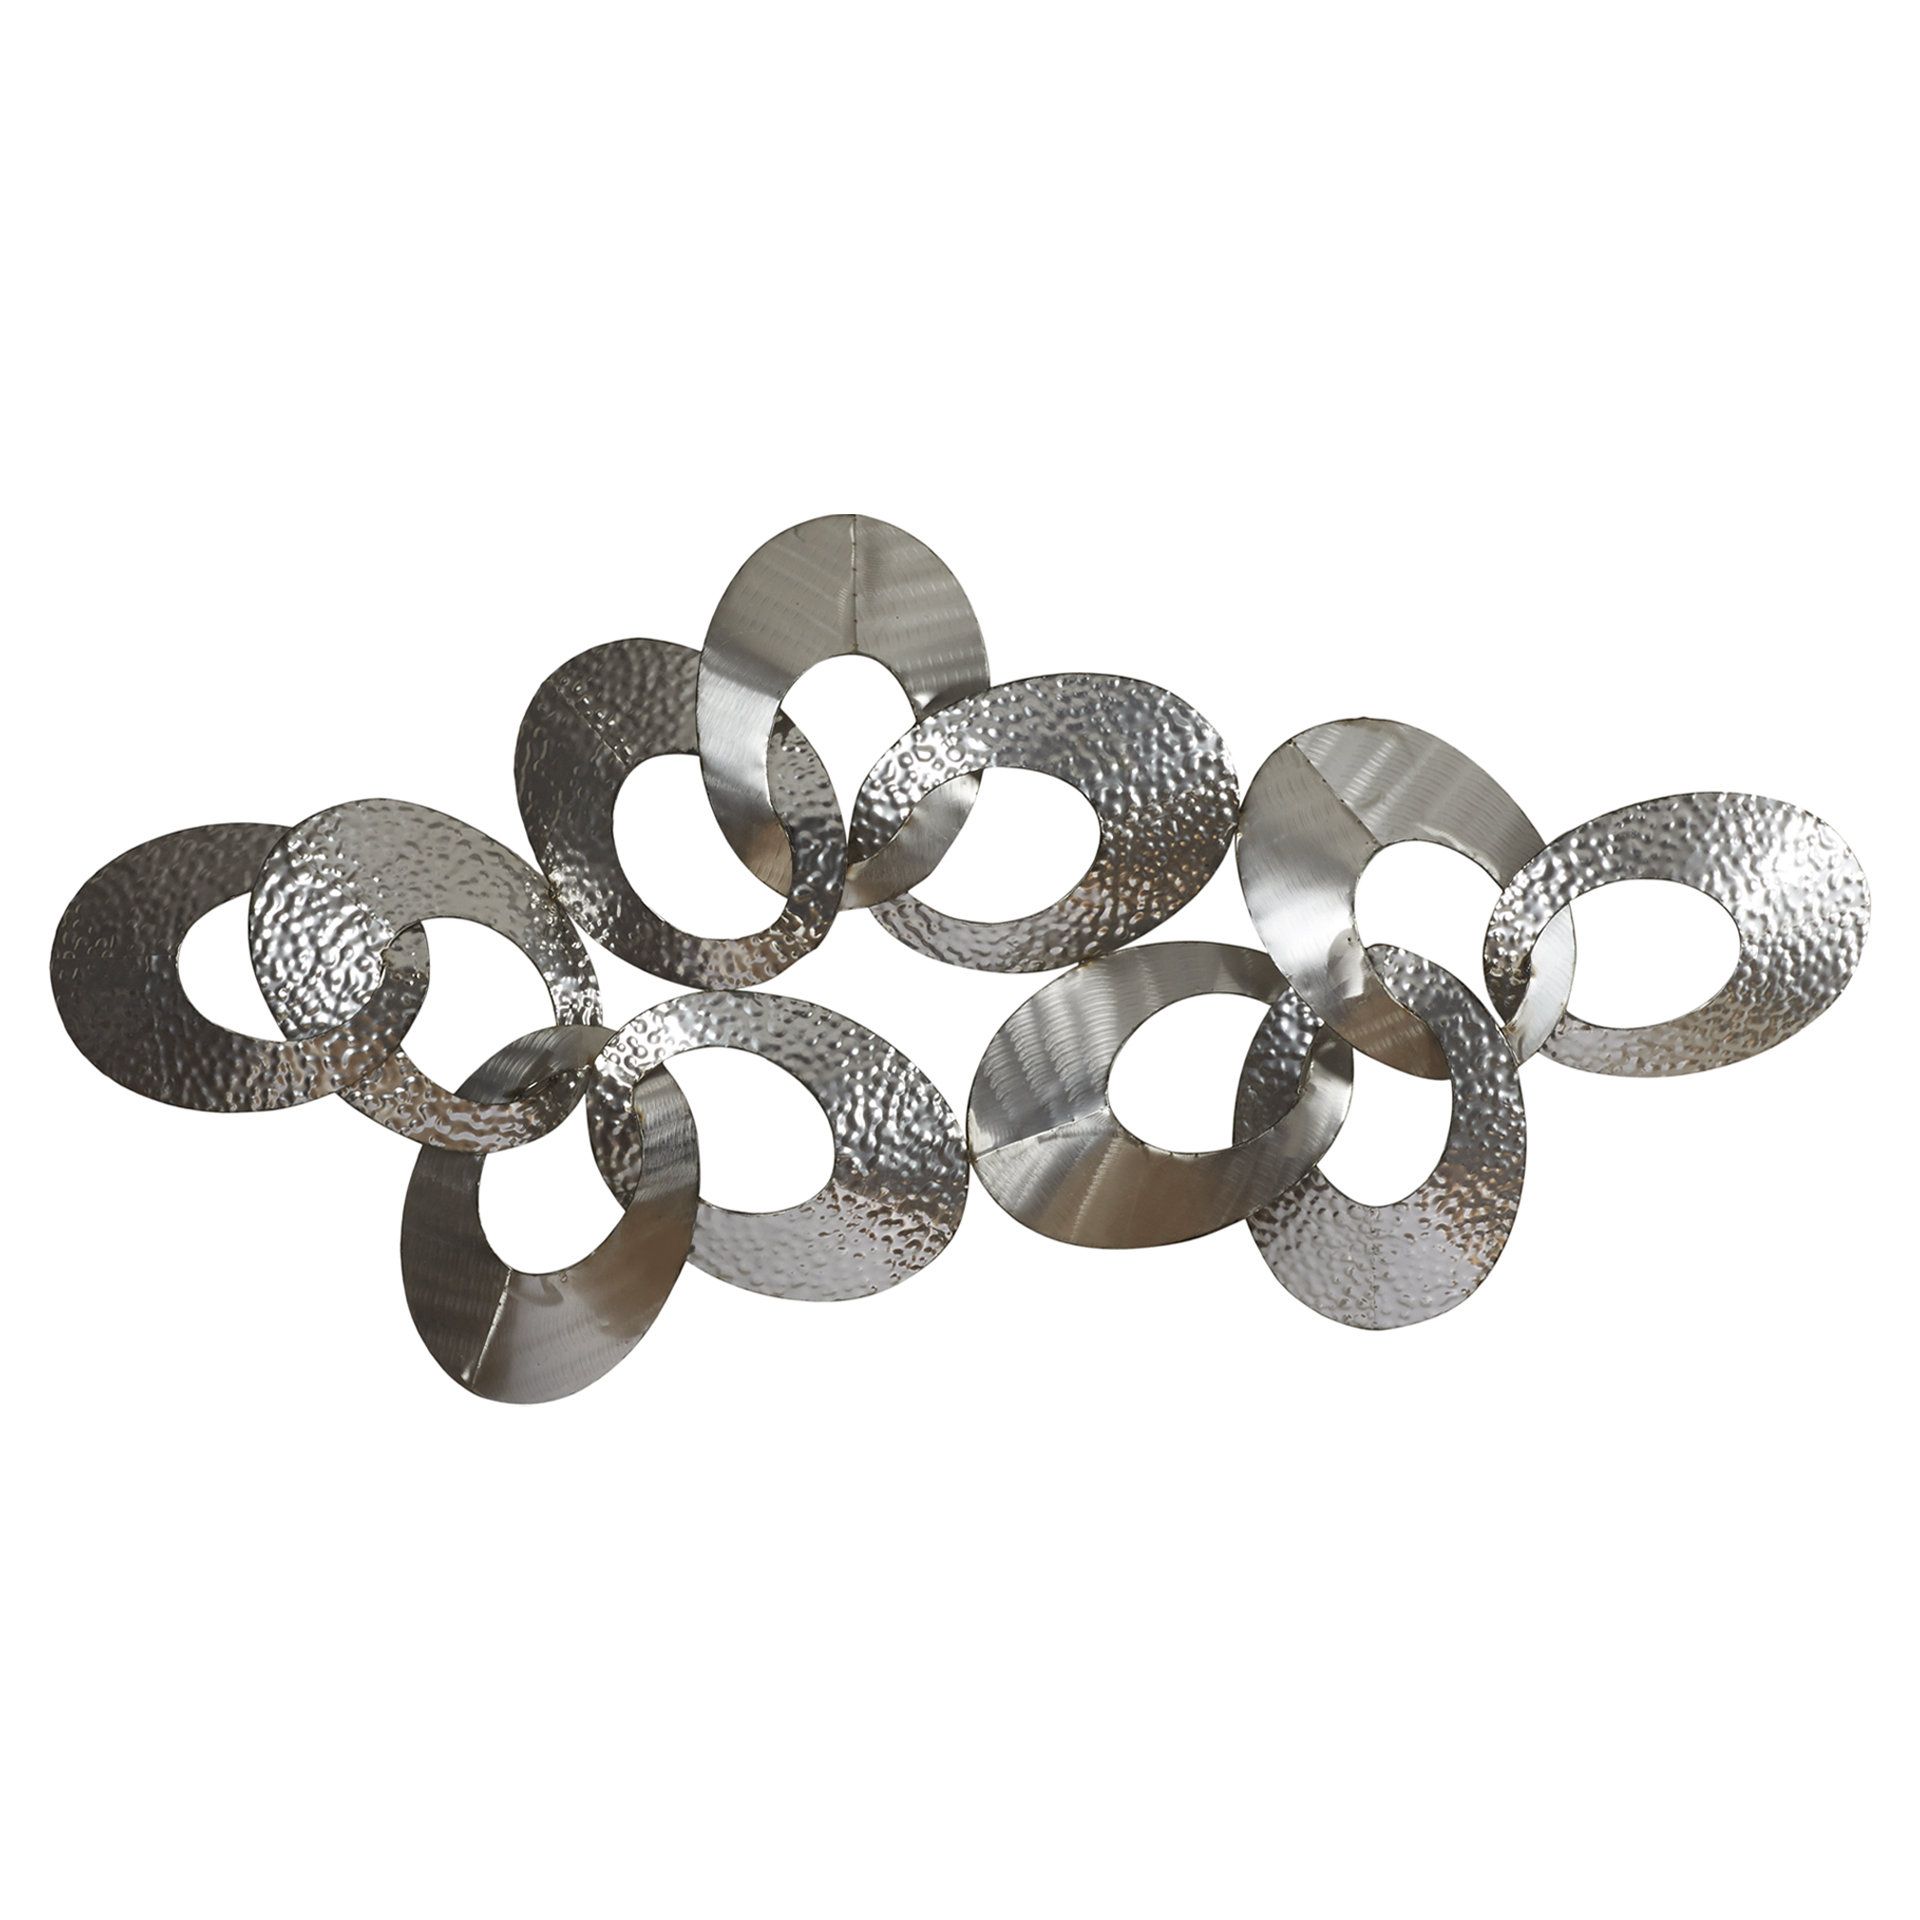 Modern Metal Wall Accents | Allmodern Within 2 Piece Heart Shaped Fan Wall Decor Sets (View 17 of 30)